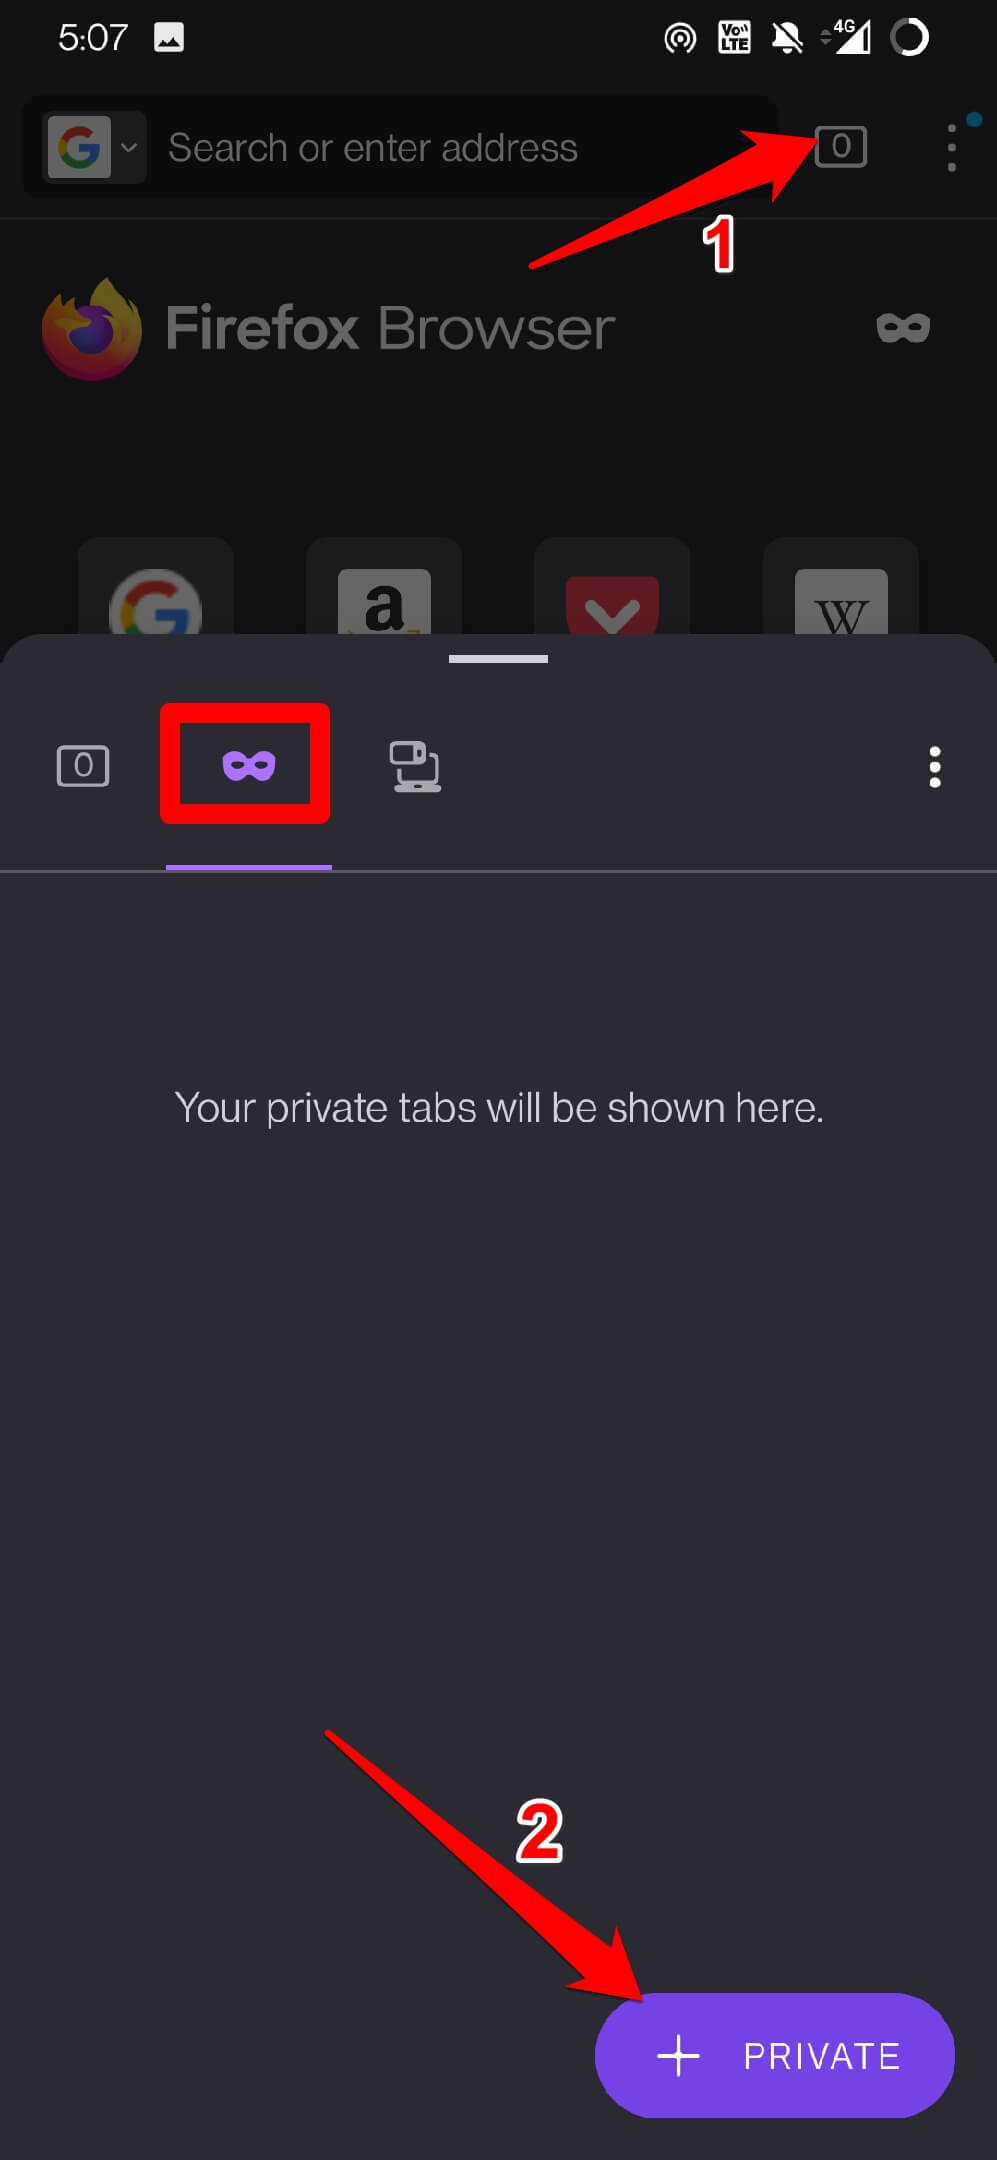 launch private browsing window in Firefox android